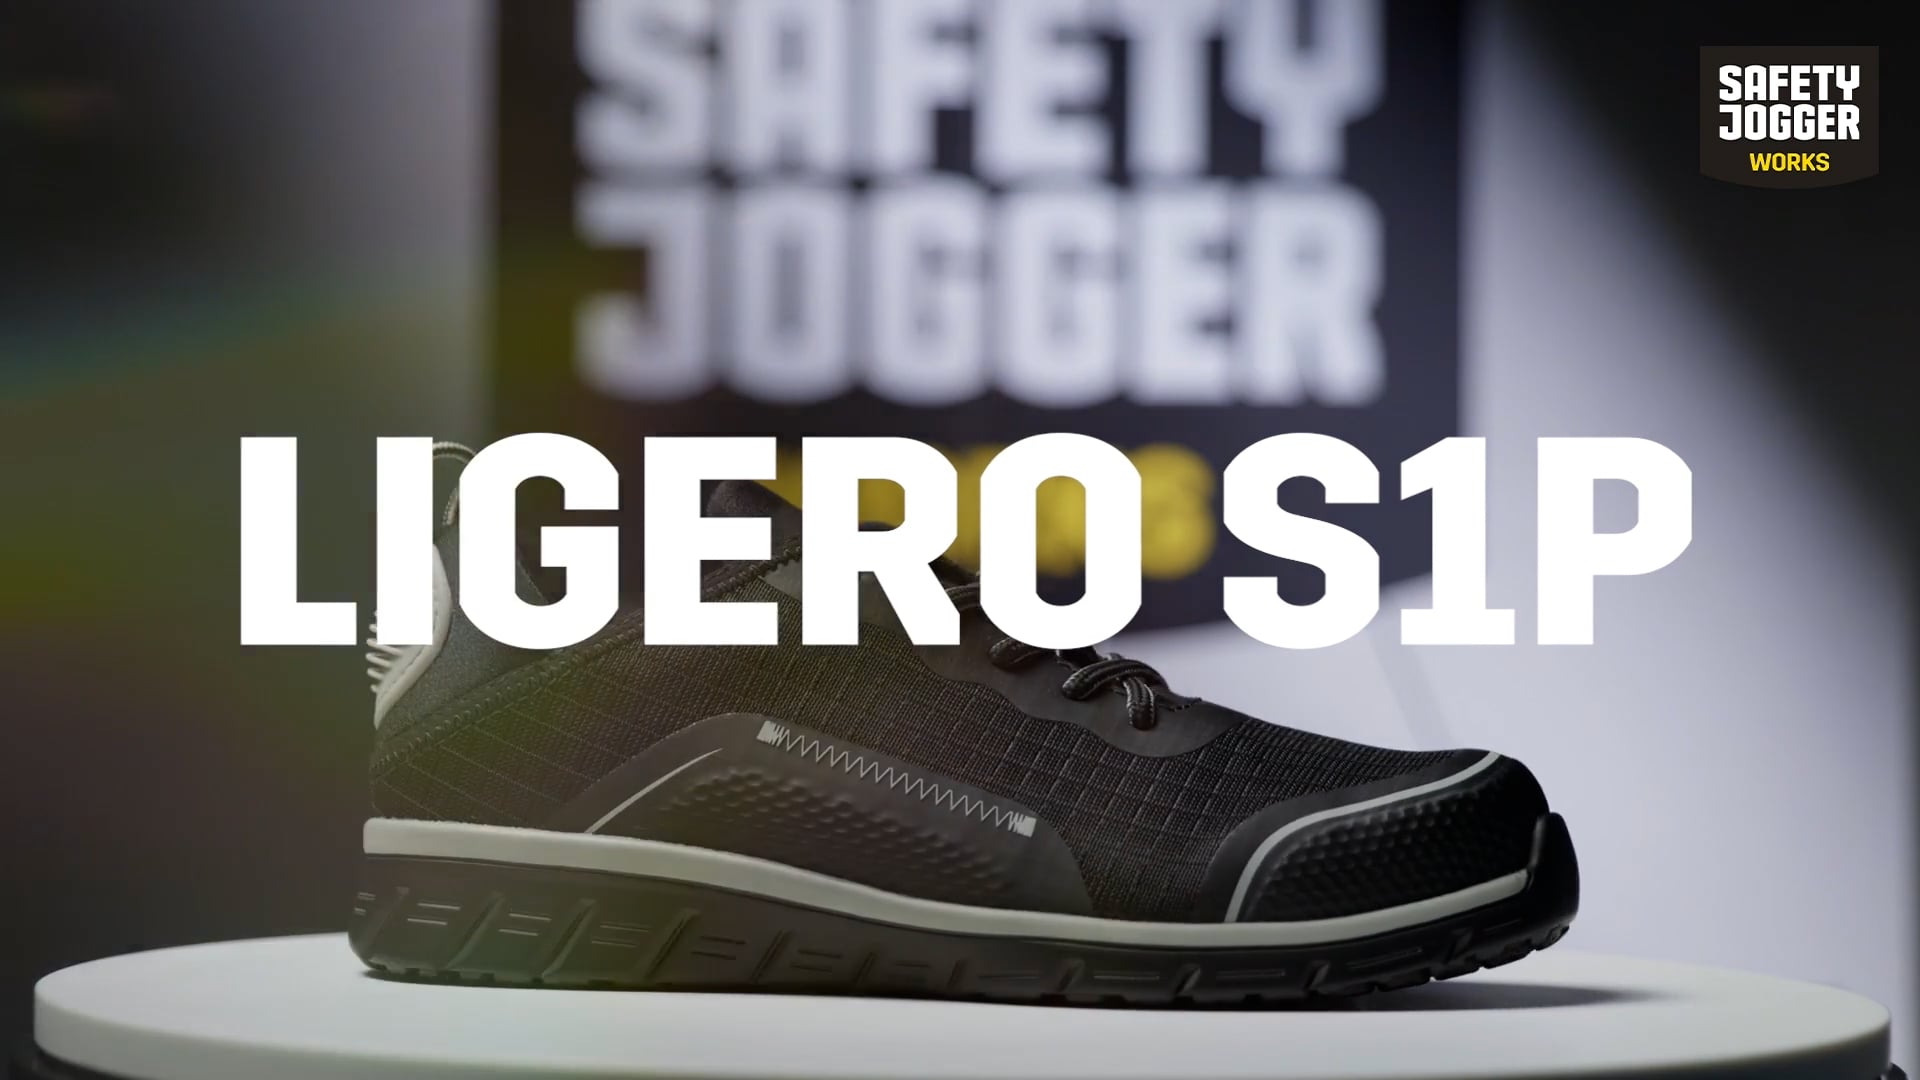 Ligero - Extremely light low-cut ESD safety shoe | Safety Jogger